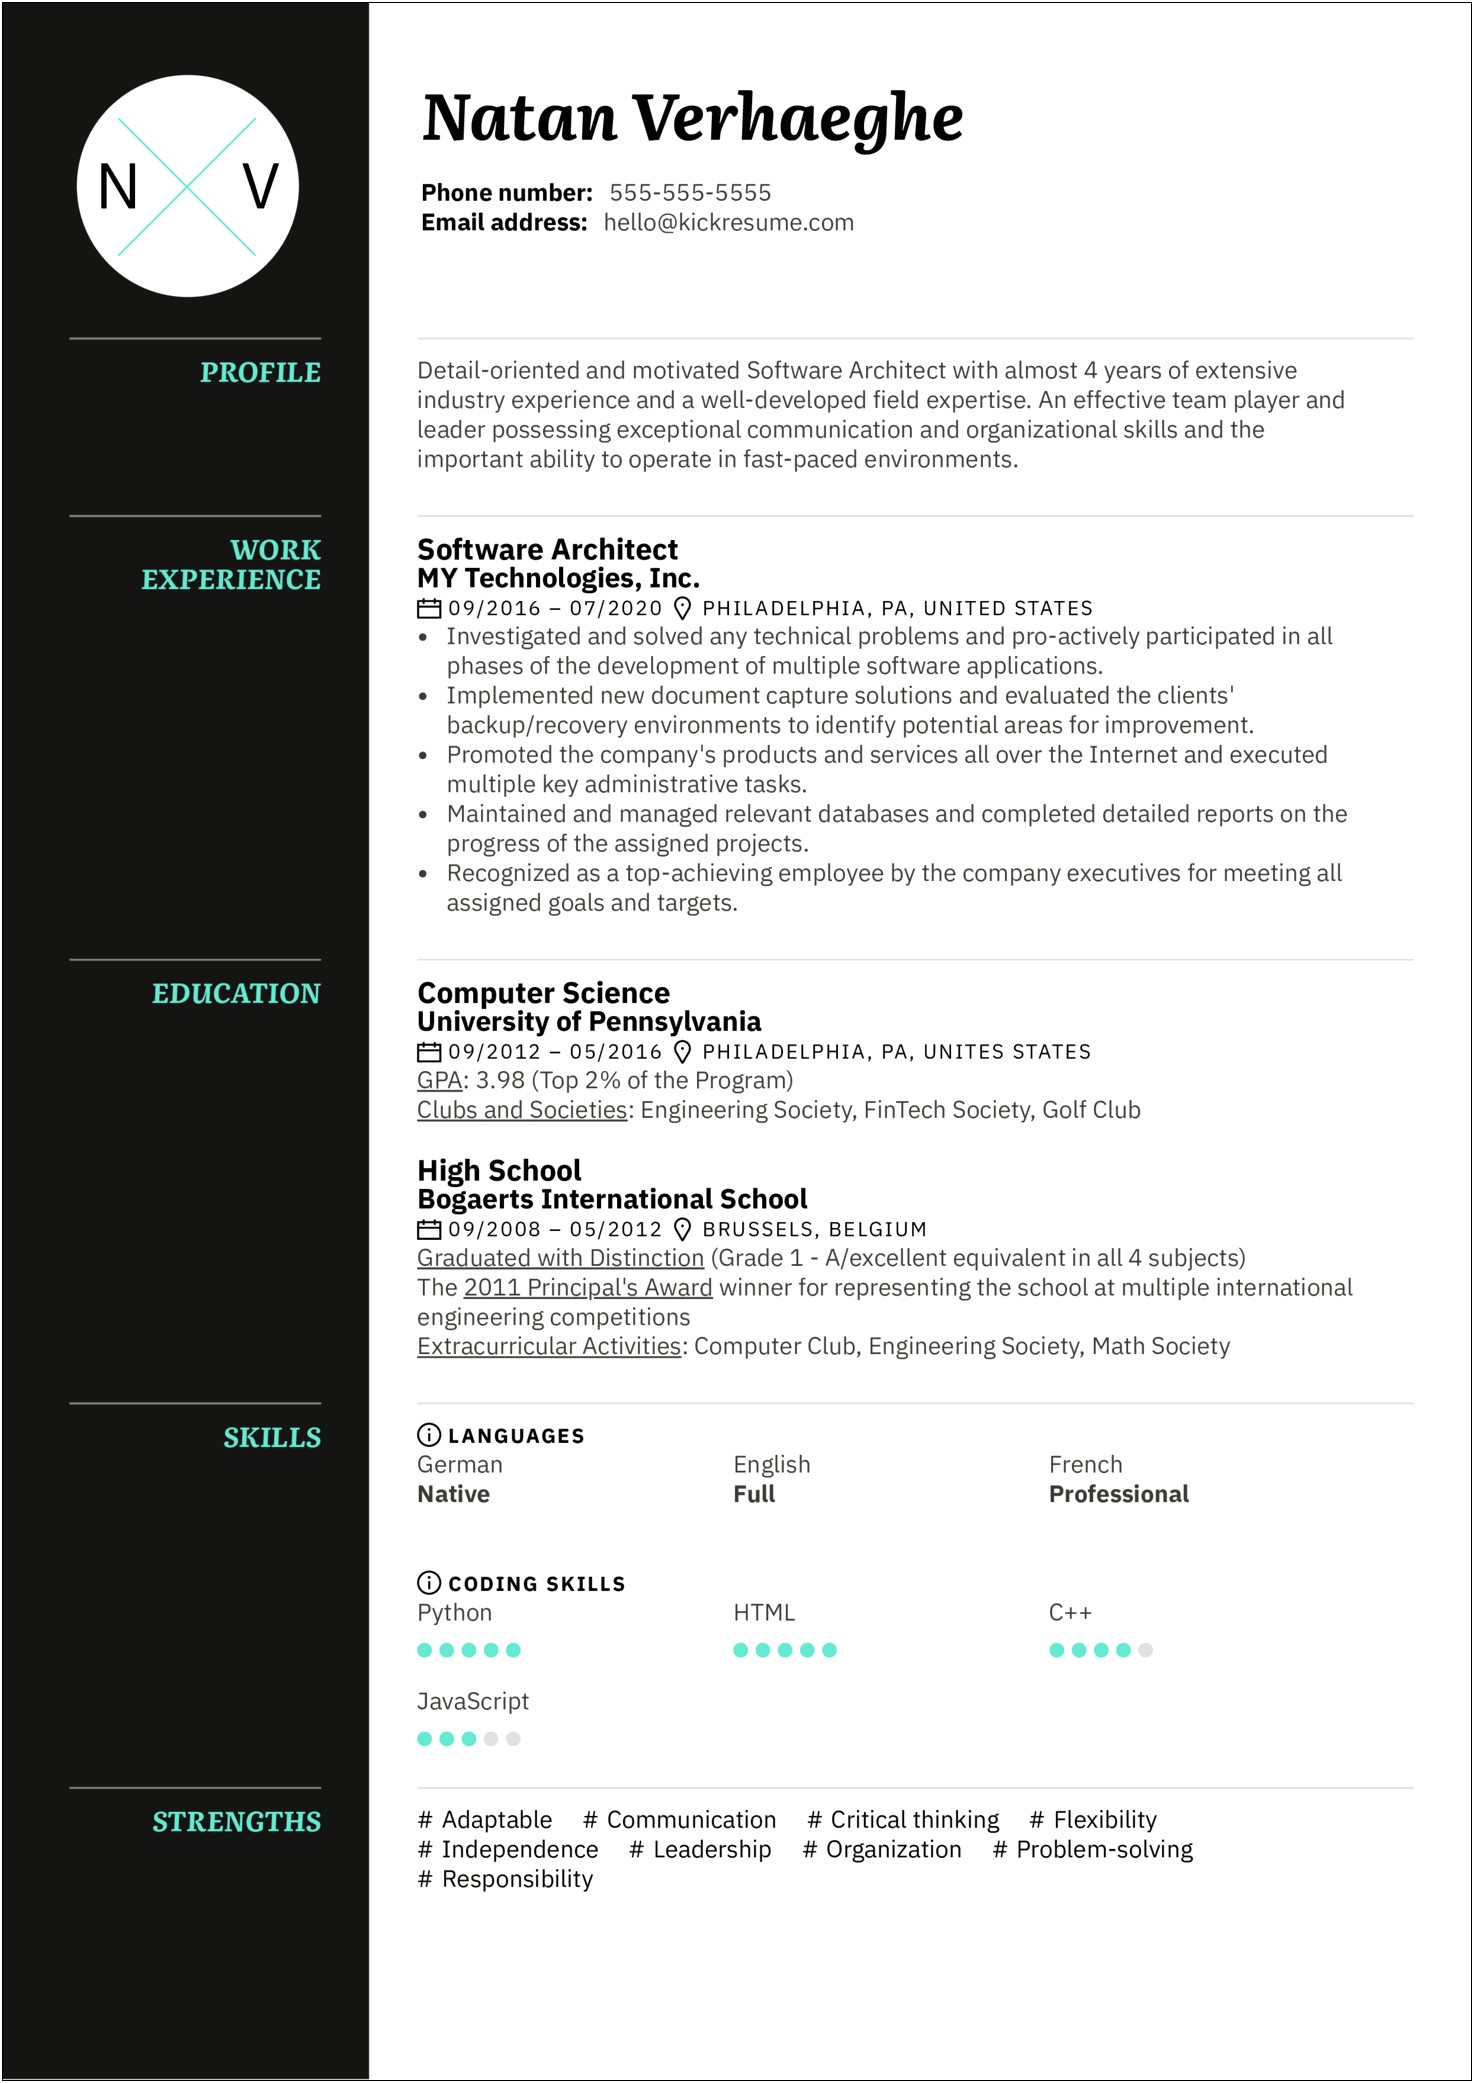 Area Of Expertise Resume Sample